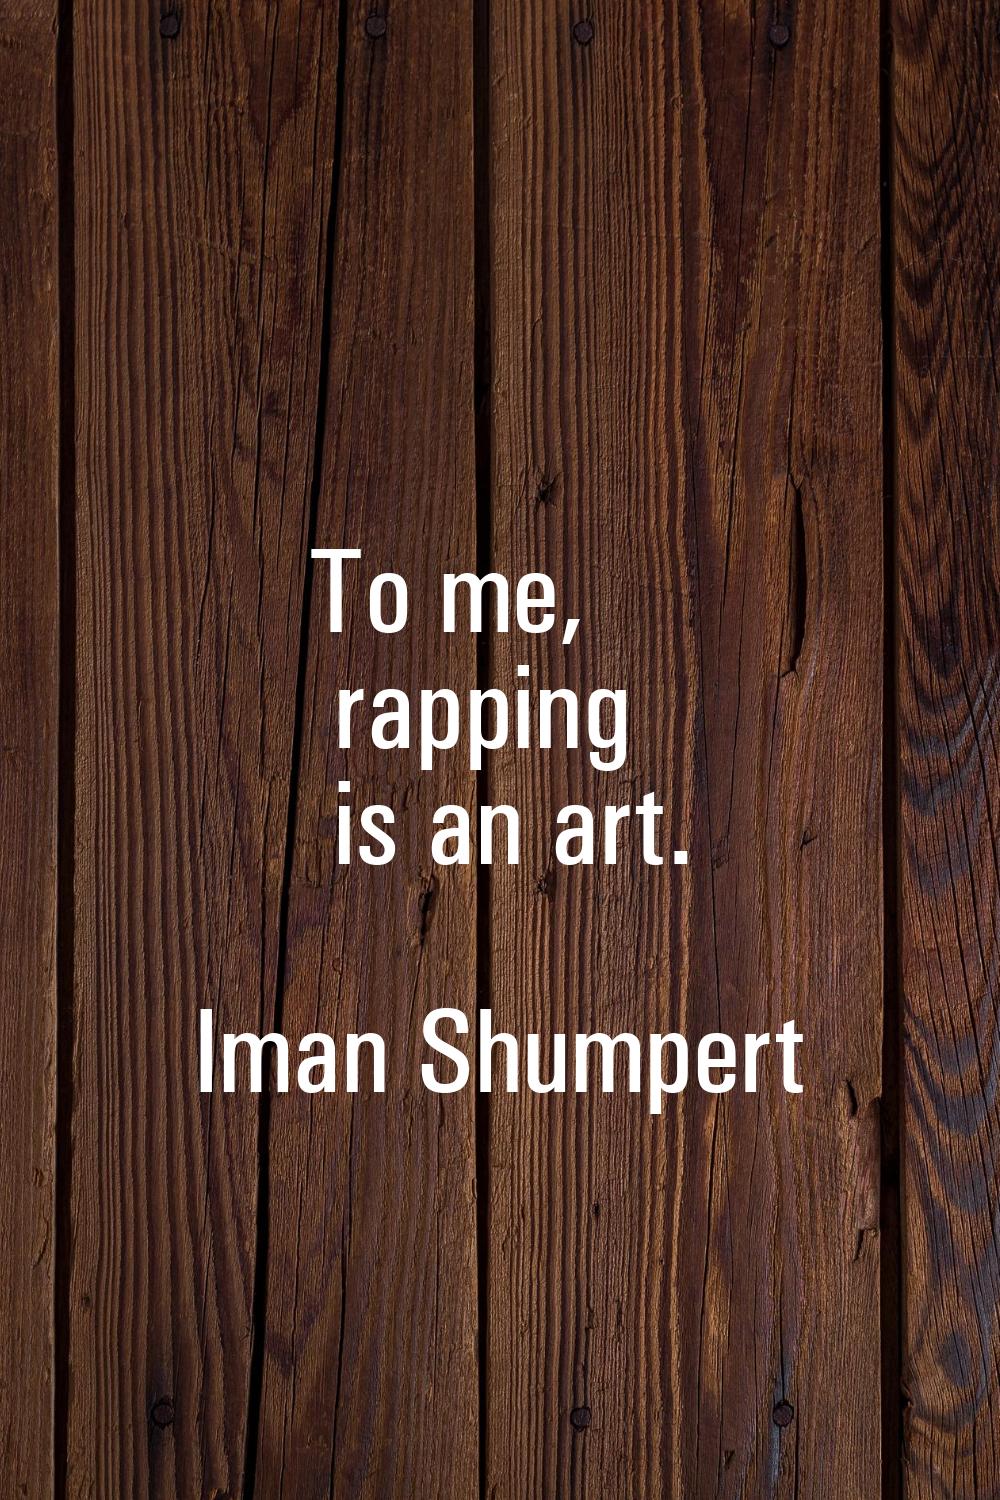 To me, rapping is an art.